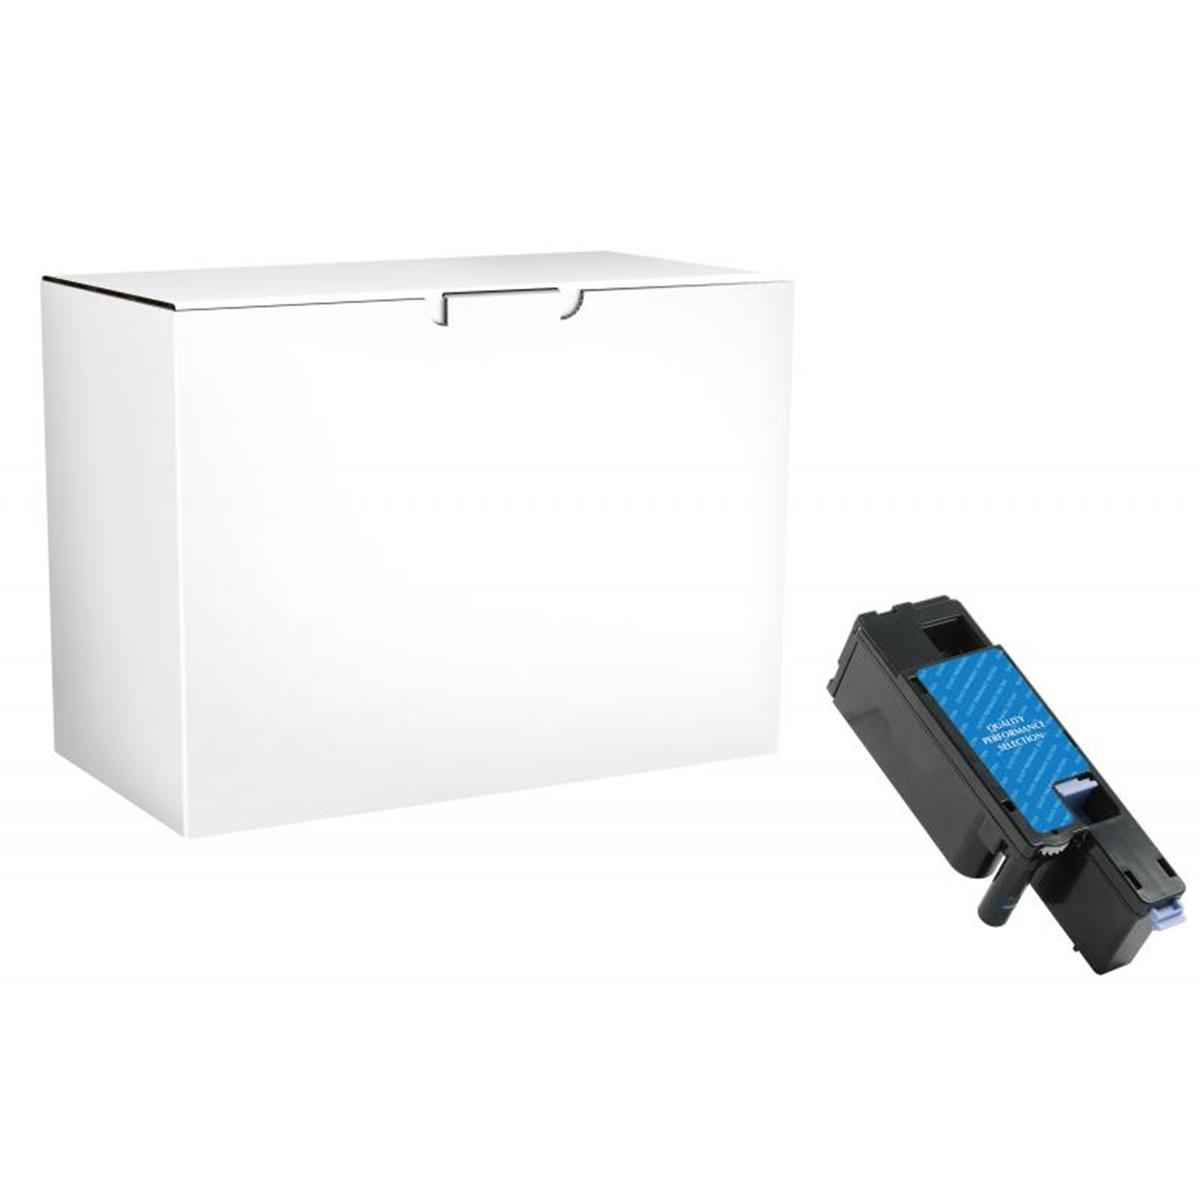 Picture of Dell 200749 Cyan Toner Cartridge for Dell C1660